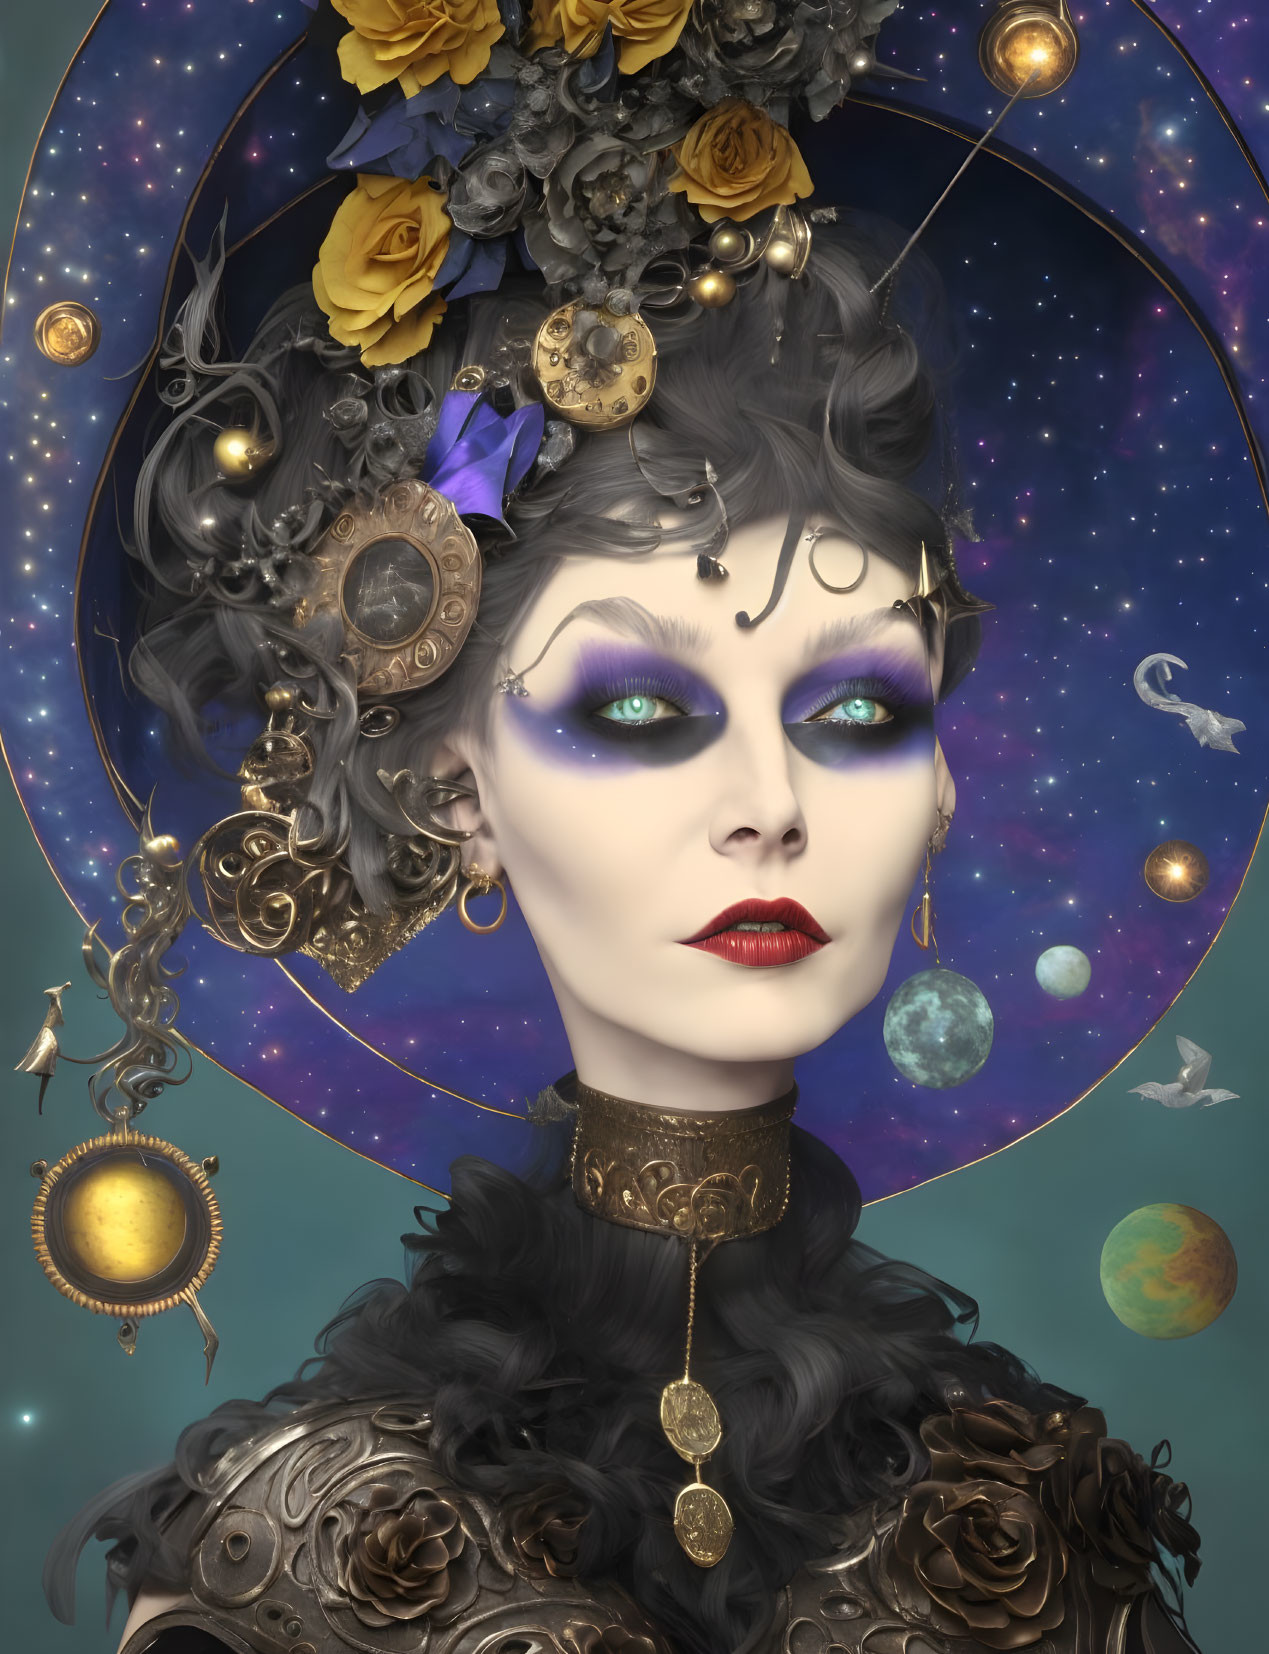 Surreal portrait of woman with elaborate headdress and cosmic background